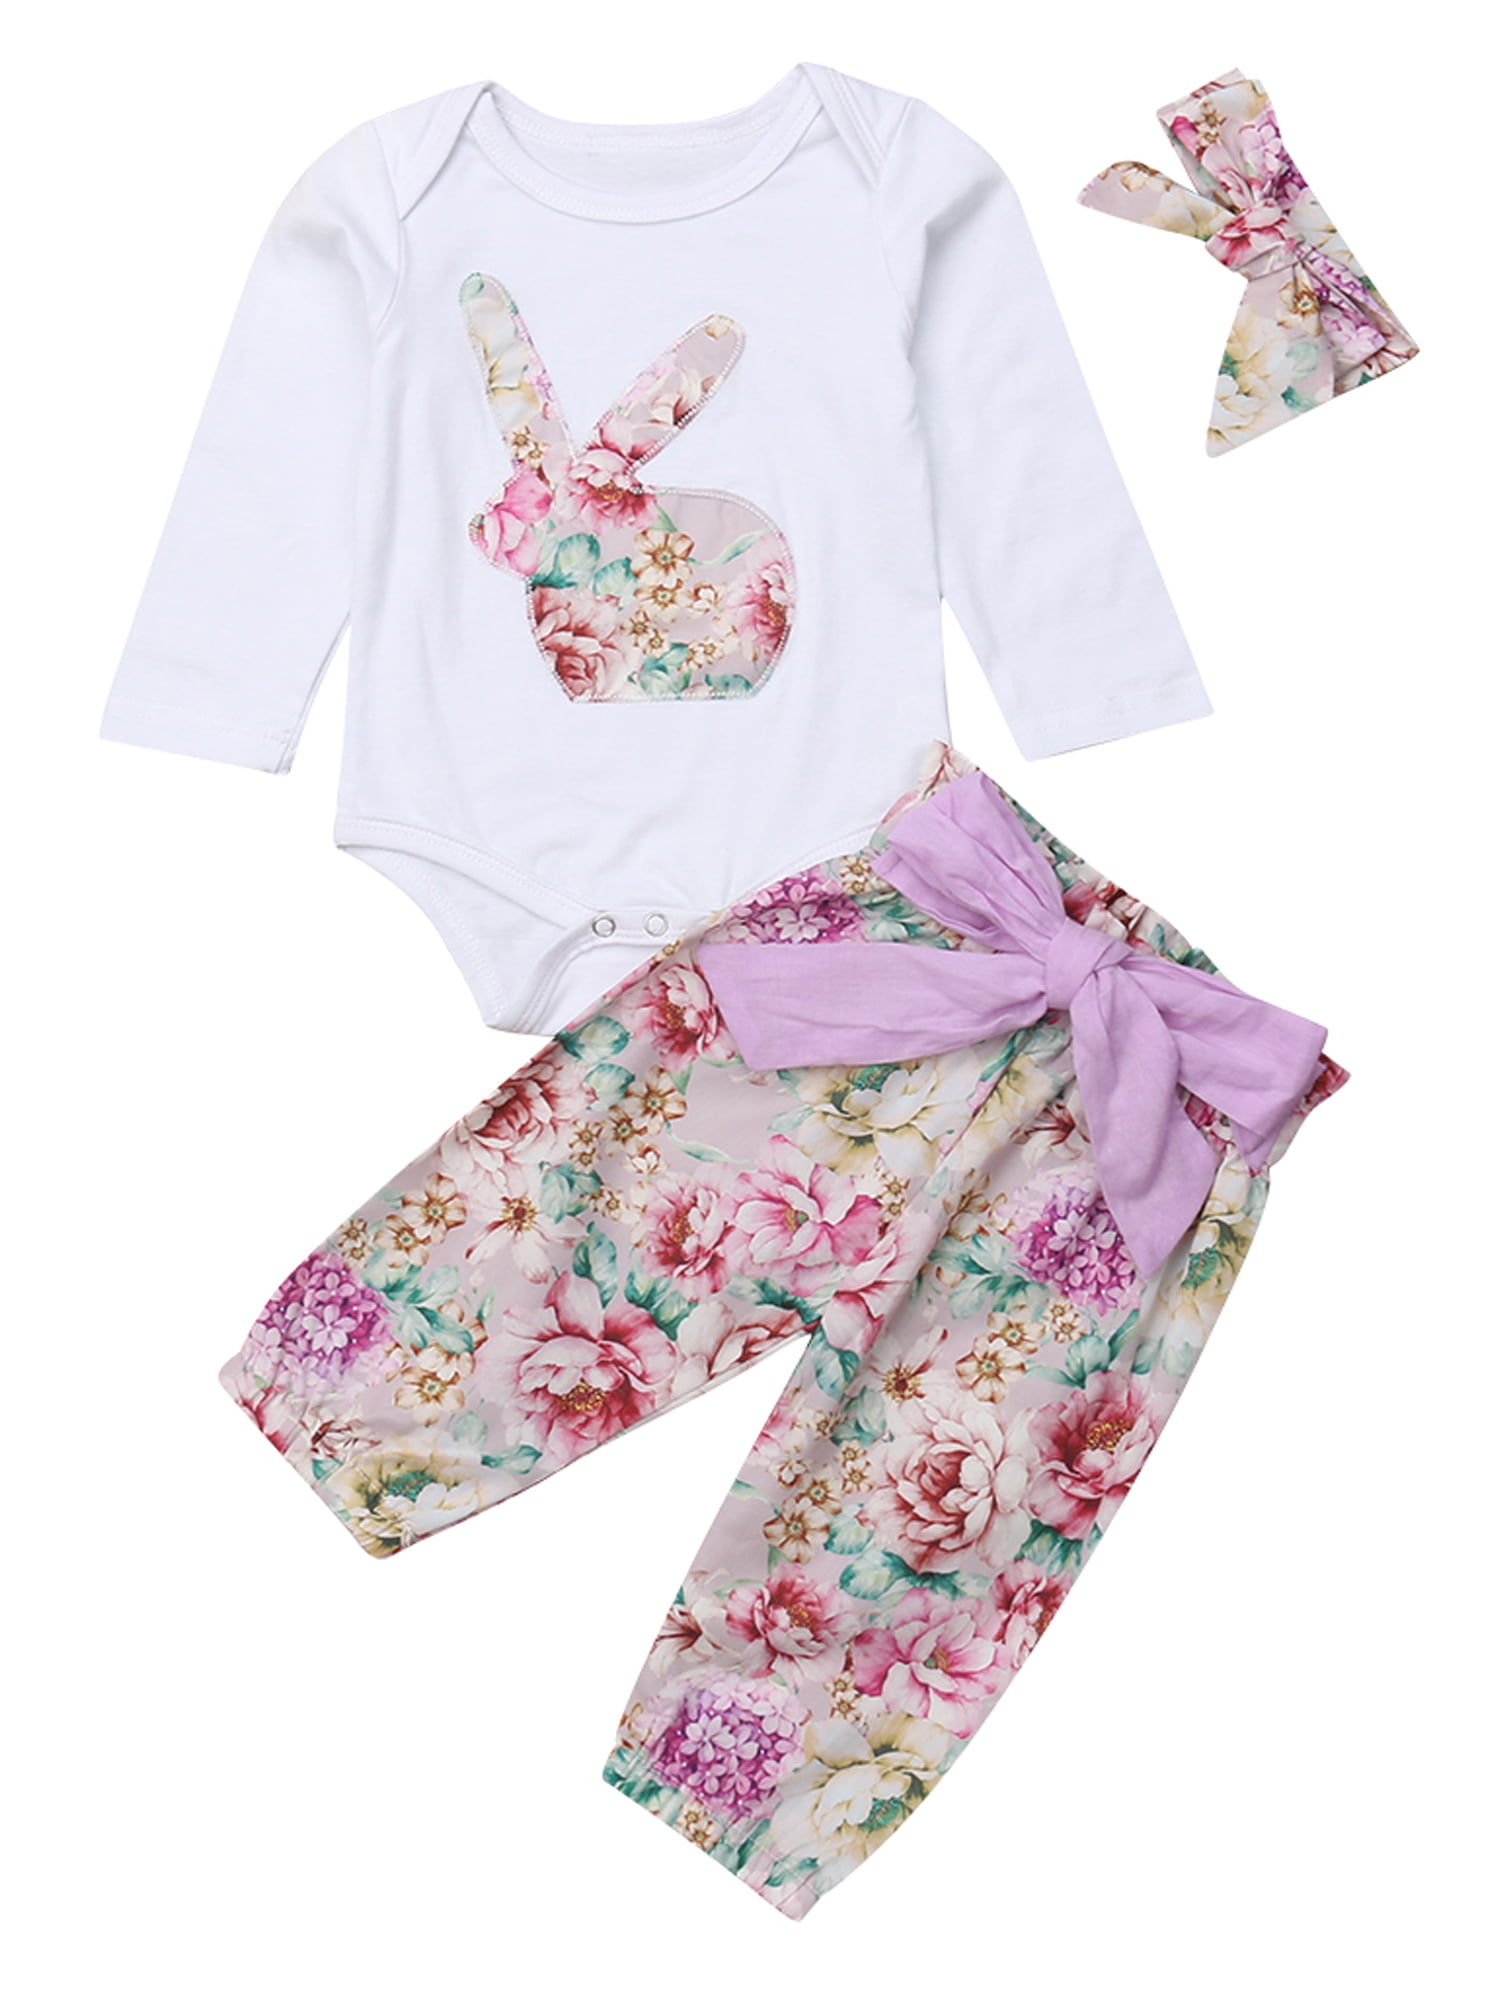 Little Story Baby Outfits Clothes,Infant Baby Girls Short Sleeve Romper+Easter Rabbit Print Suspender Skirt Set Girls Outfits&Set Baby Clothing for Easter